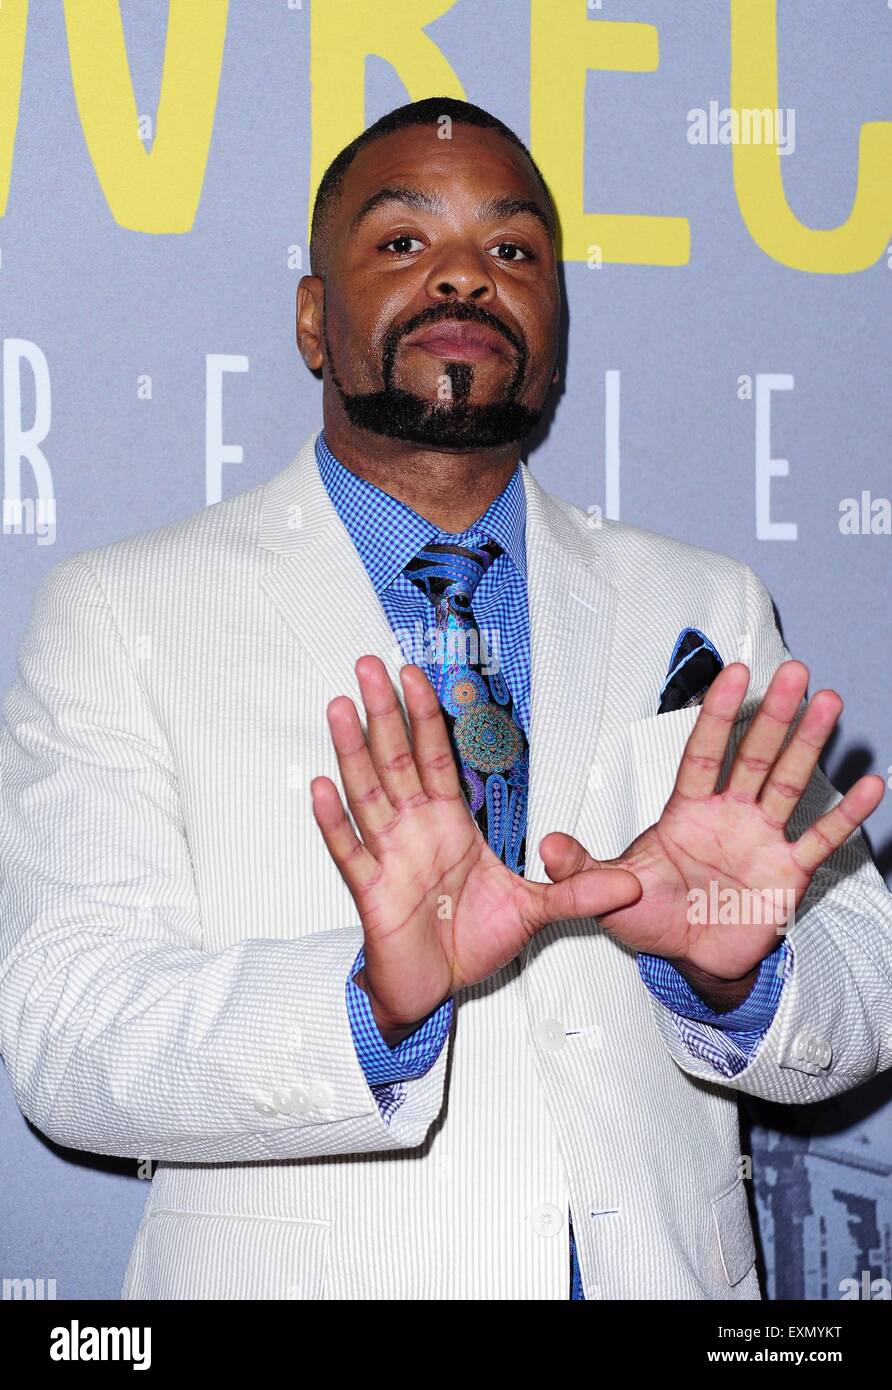 New York, NY, USA. 14th July, 2015. Method Man at arrivals for TRAINWRECK World Premiere, Alice Tully Hall at Lincoln Center, New York, NY July 14, 2015. Credit:  Gregorio T. Binuya/Everett Collection/Alamy Live News Stock Photo